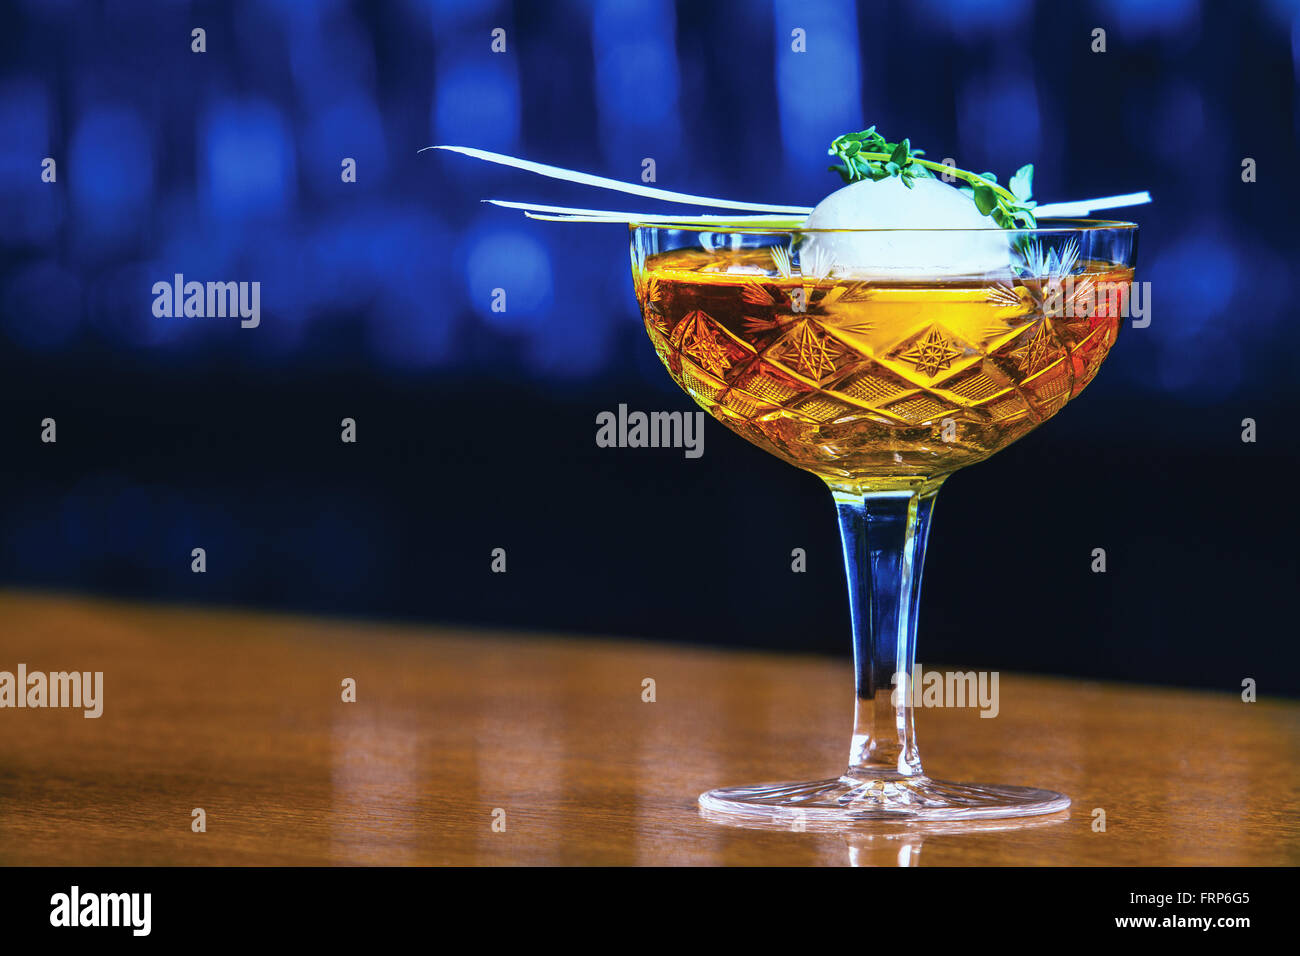 https://c8.alamy.com/comp/FRP6G5/alcoholic-beverage-based-on-bar-counter-with-balls-ice-cubes-FRP6G5.jpg